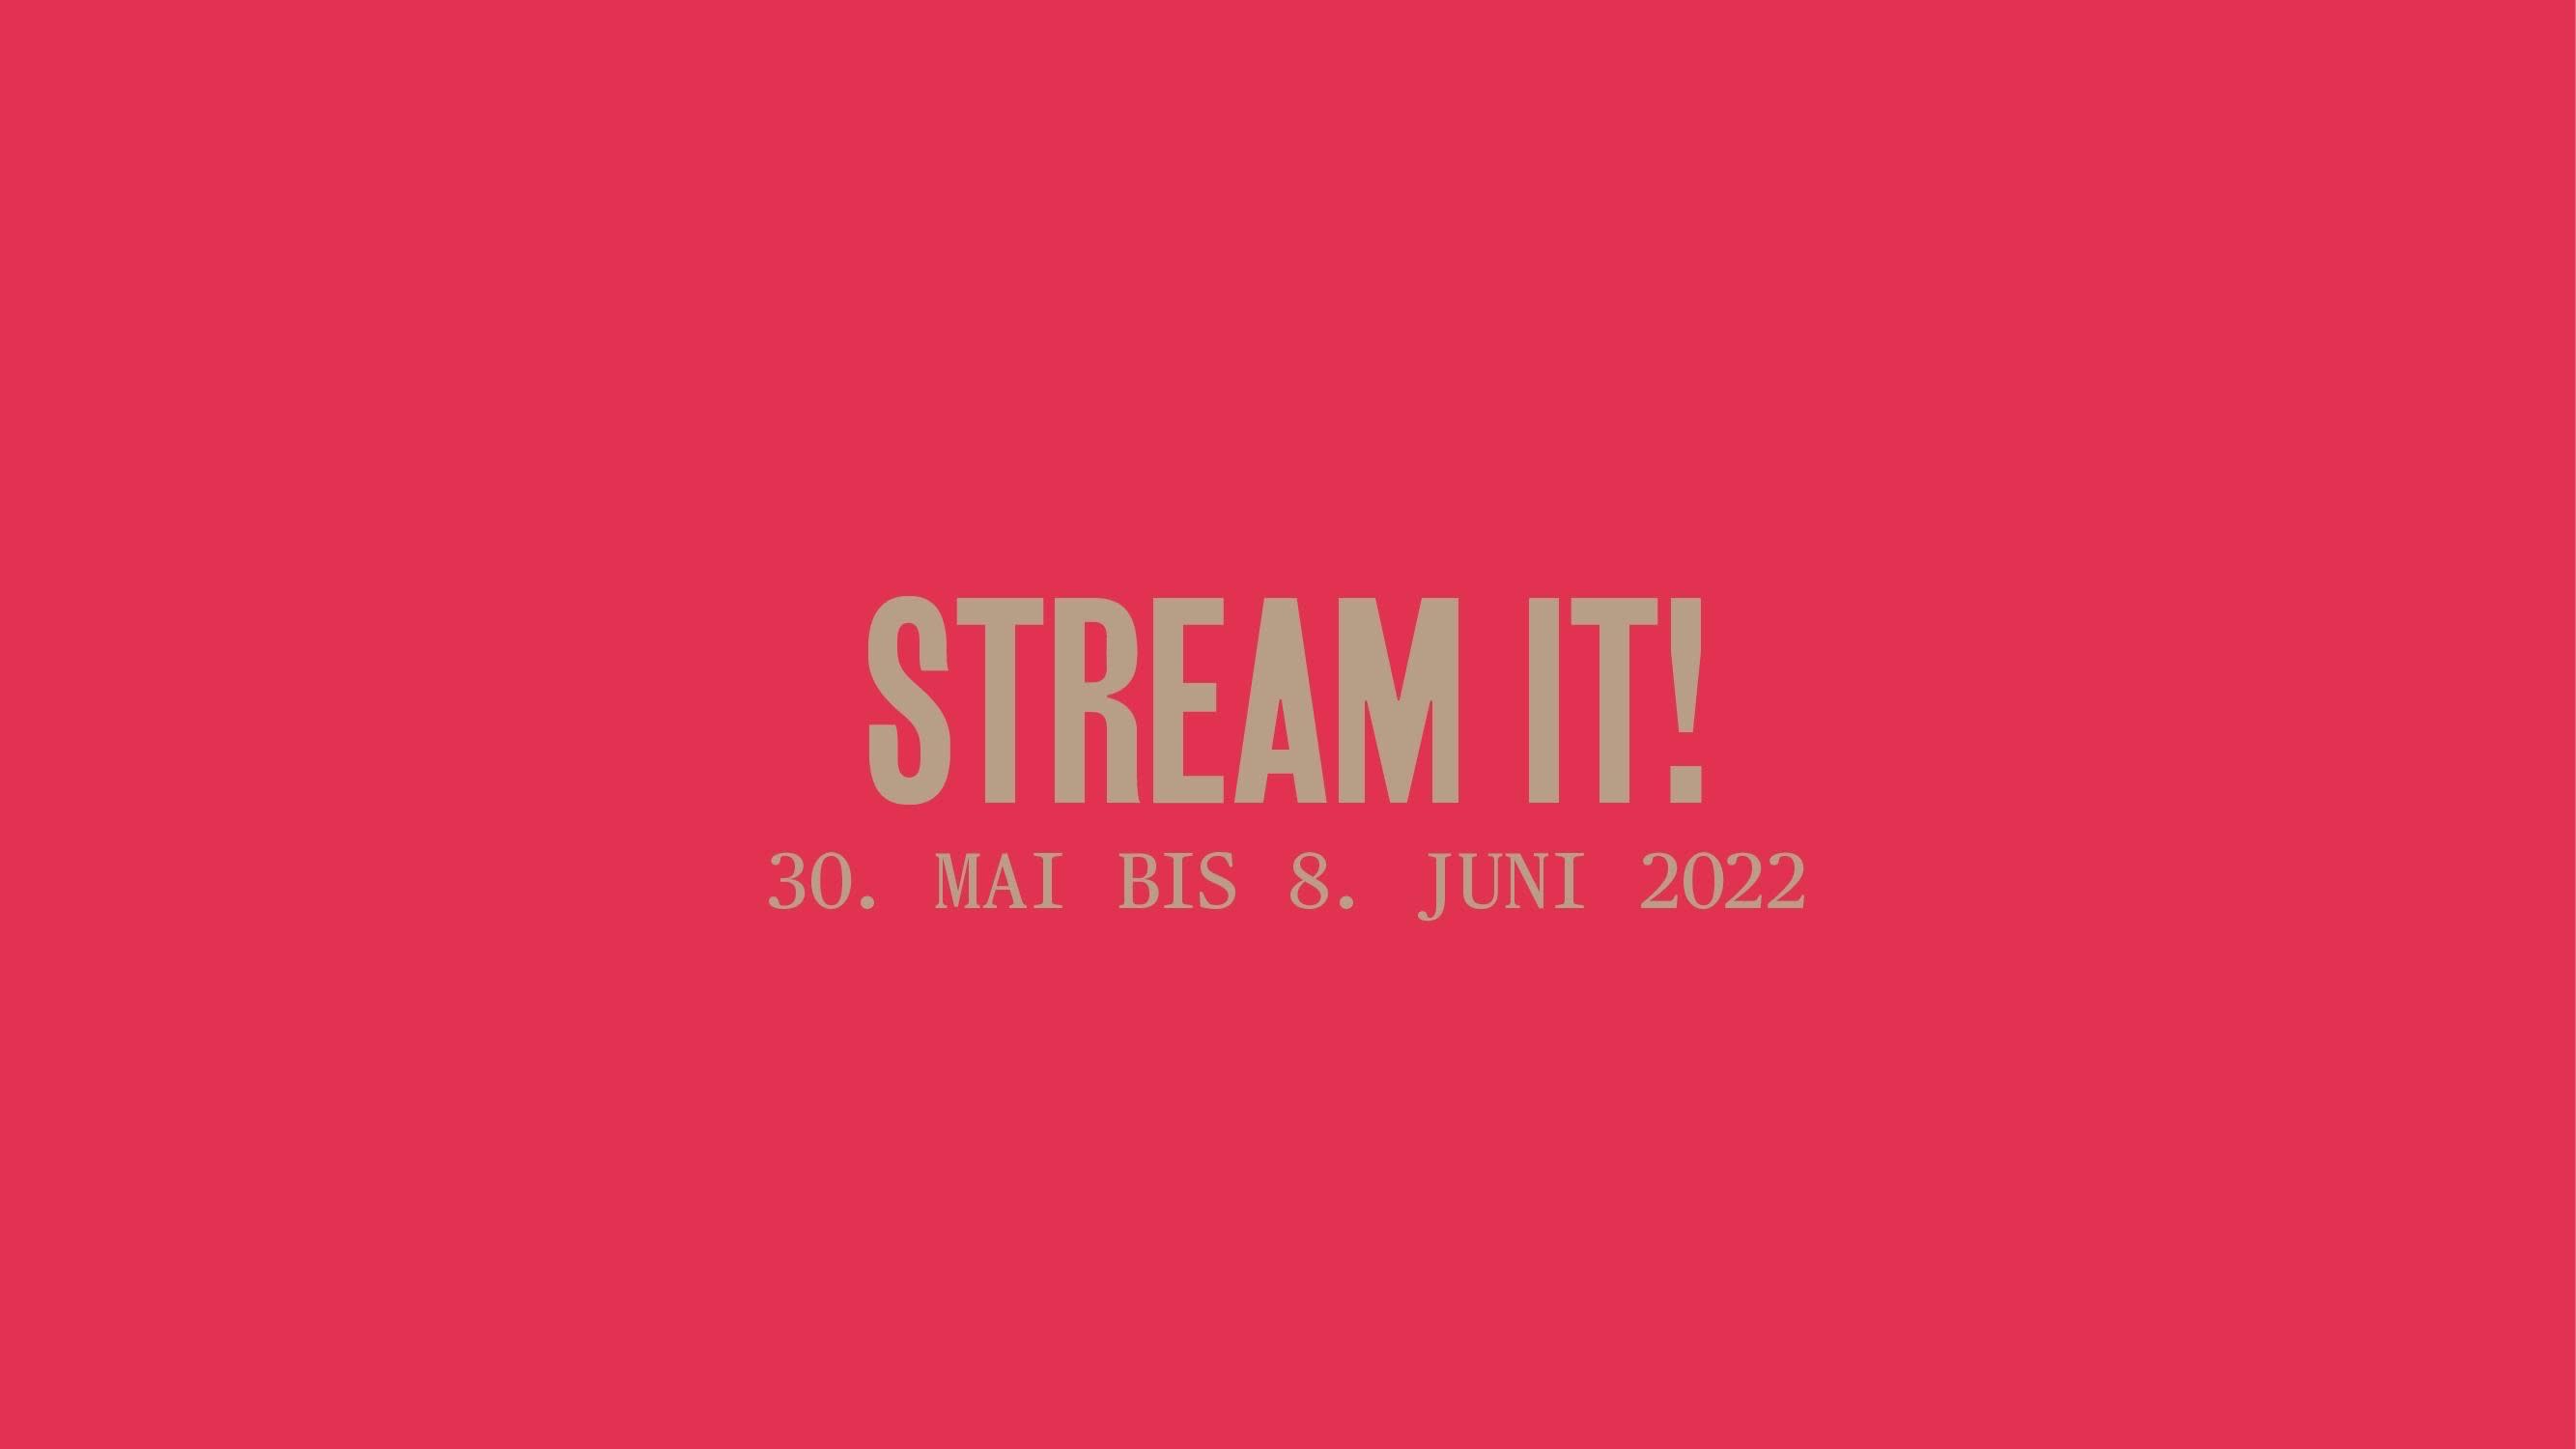 STREAM IT! IFFI stream is now online for 10 days